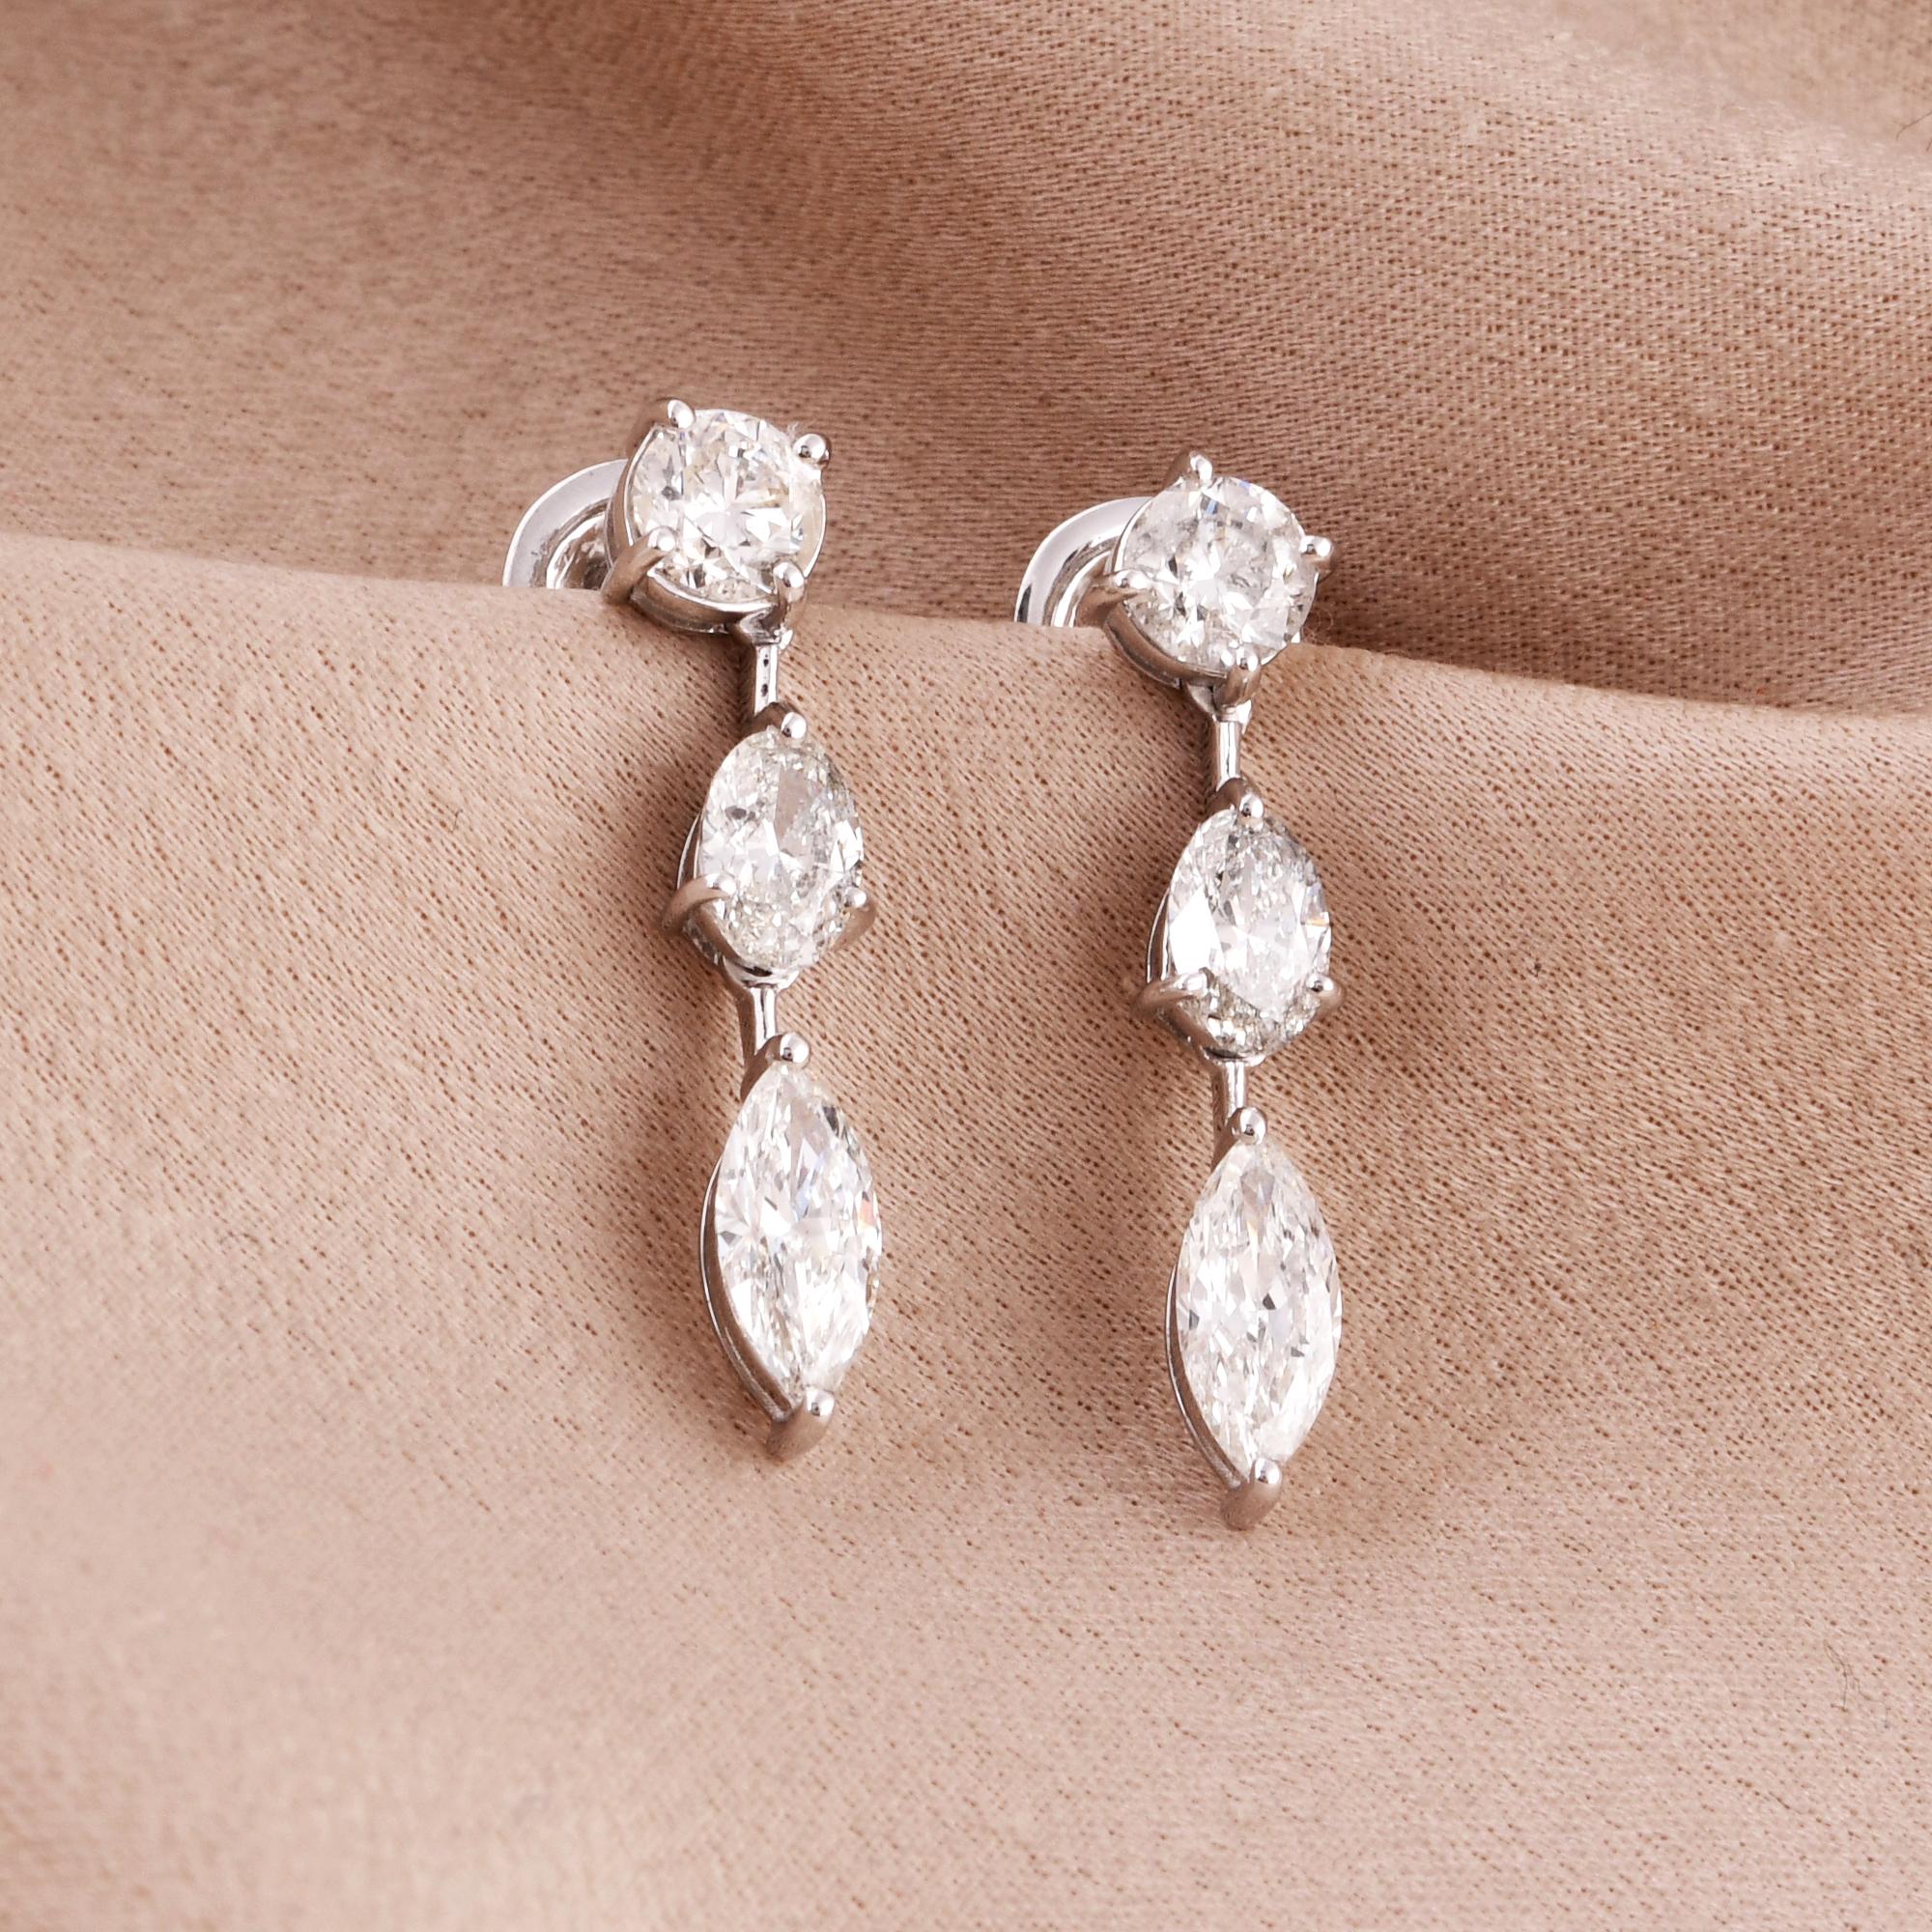 Introducing our exquisite Diamond Dangle Earrings, a perfect blend of sophistication and allure. These earrings are designed to make a statement and add a touch of glamour to any occasion. These earrings are available in 10k/14k/18k, Rose